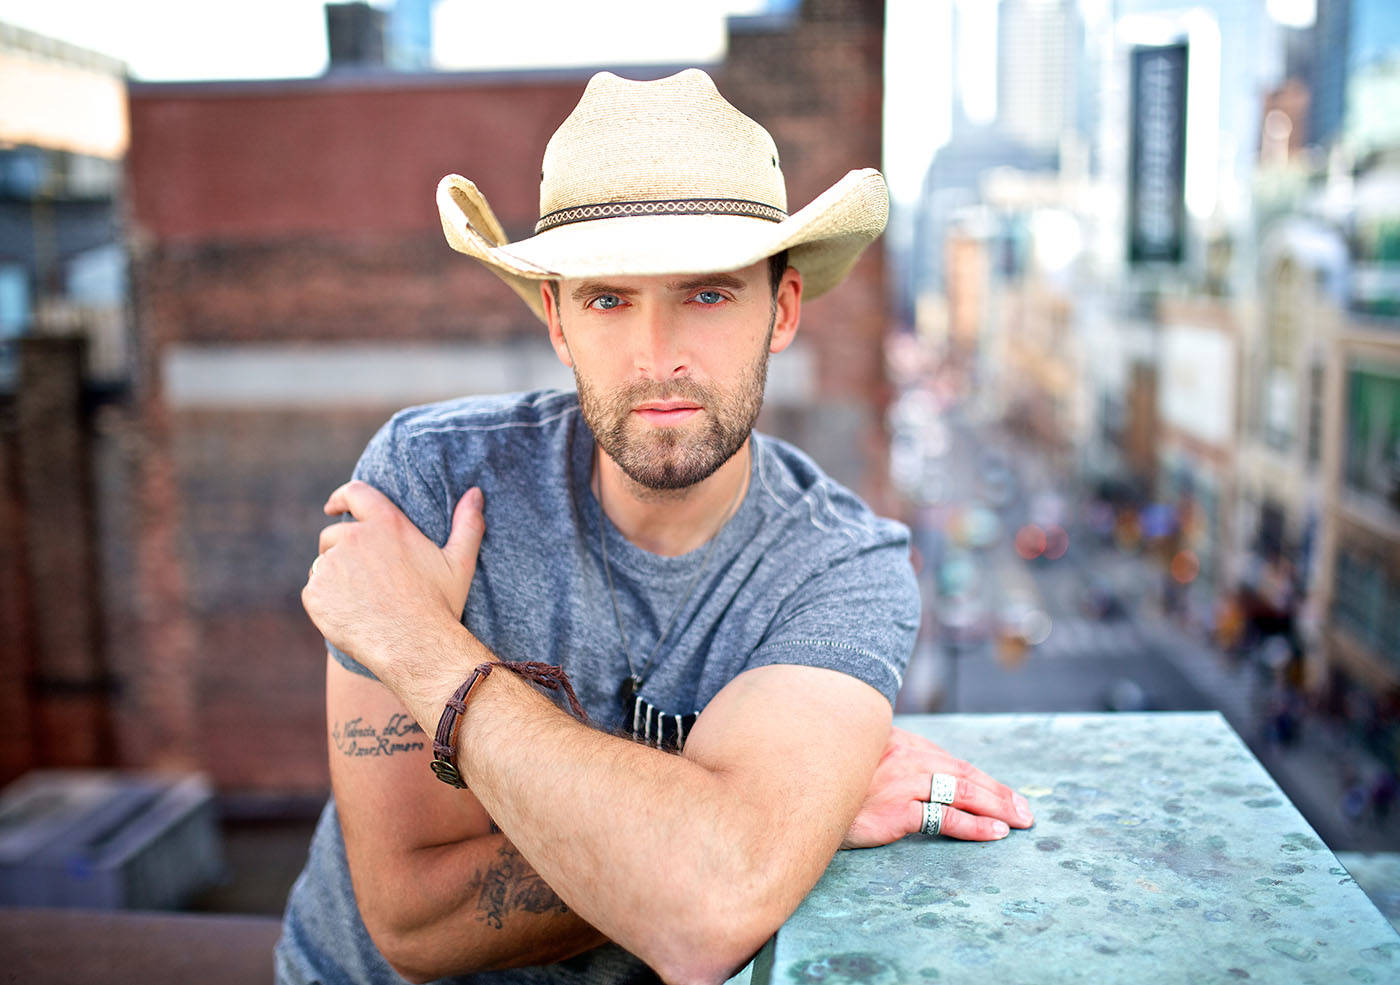 13225076_web1_170510-EXP-DeanBrody